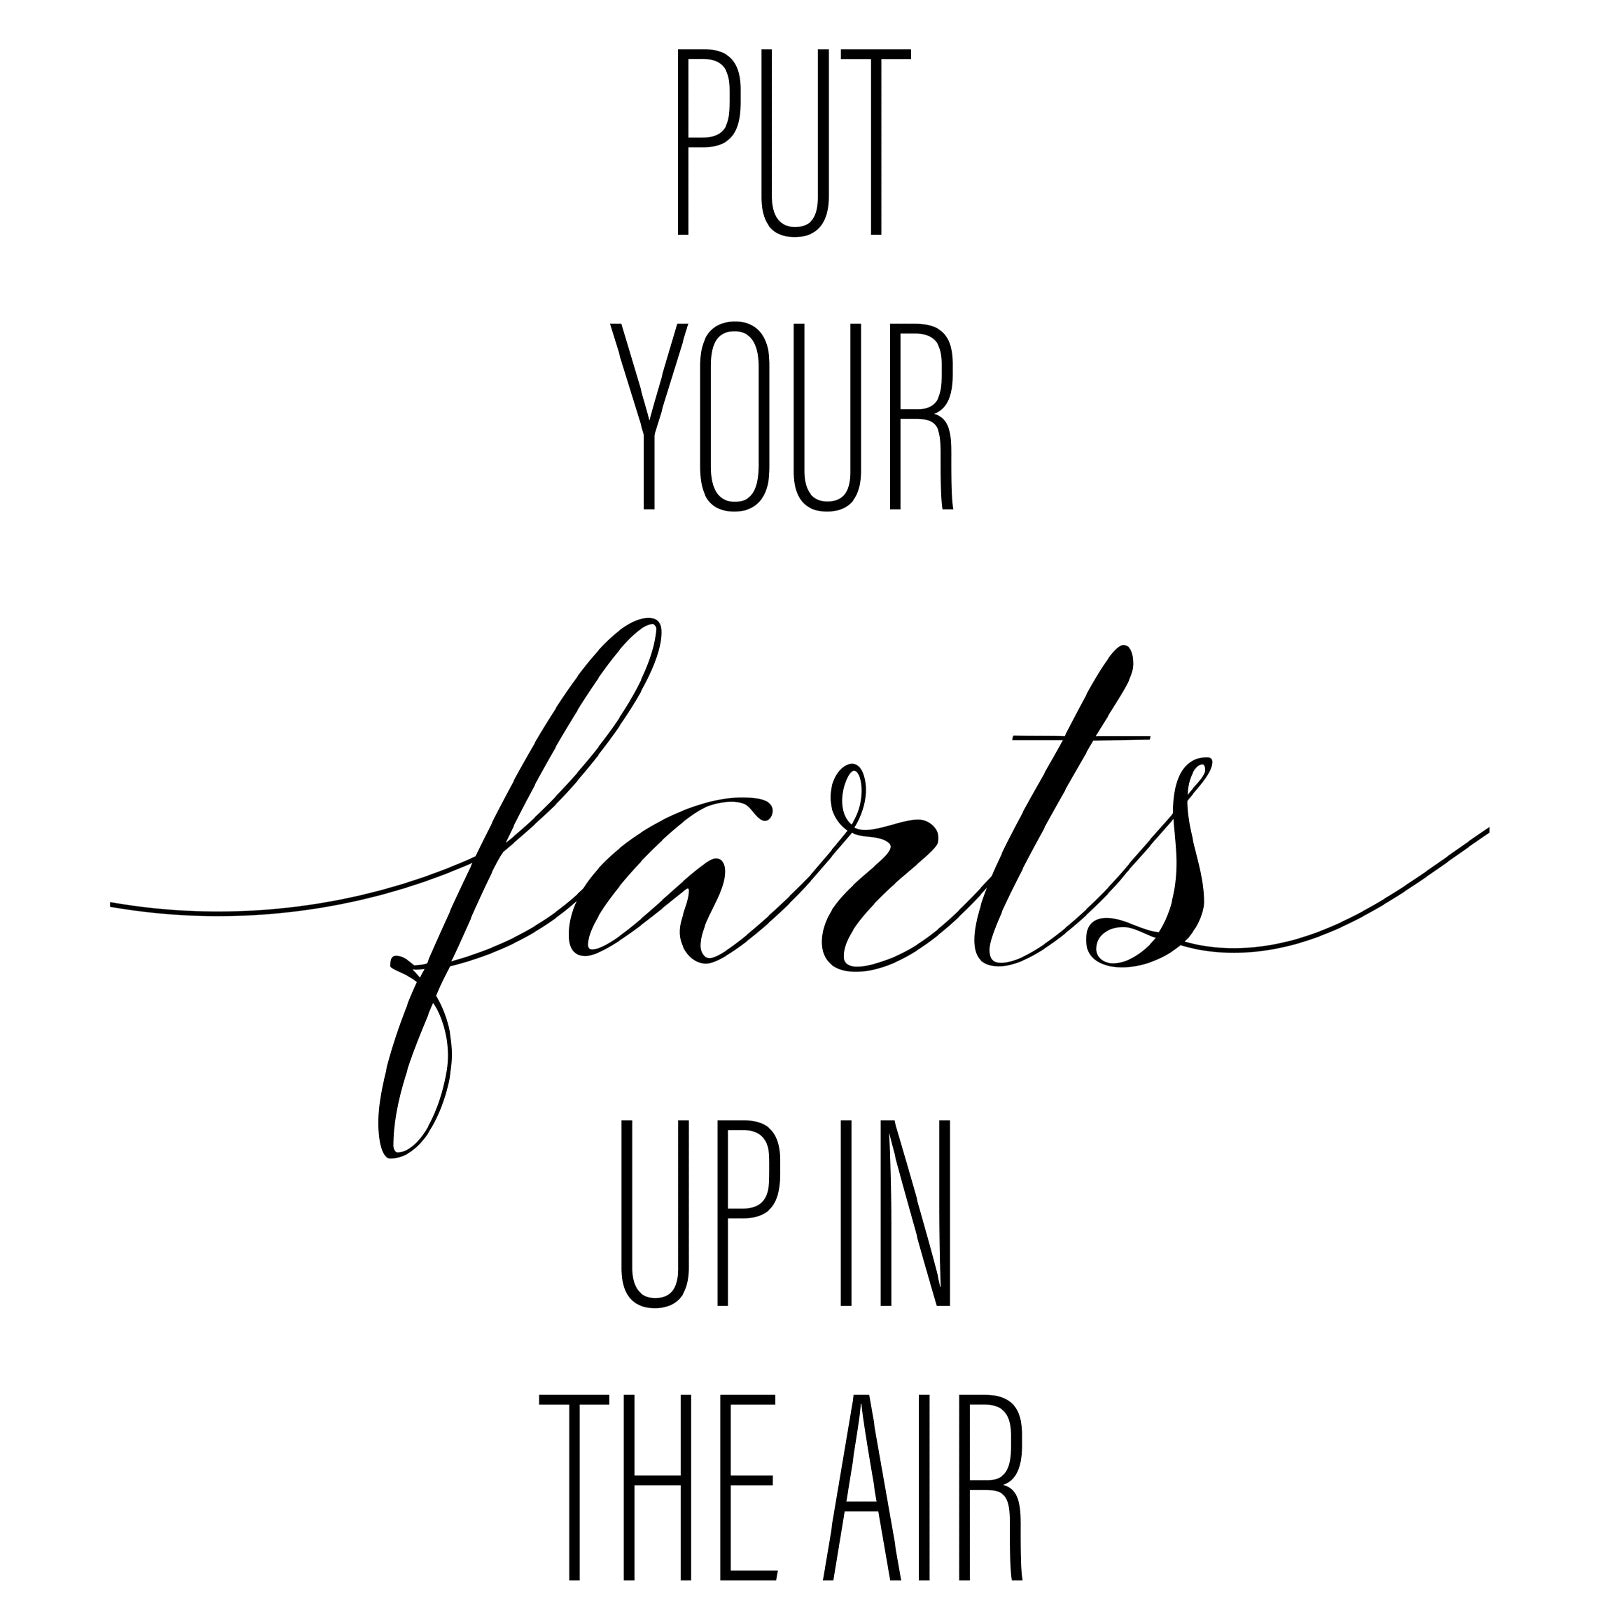 Put Your Farts Up In The Air A4 A3 A2 - Vintage Wall Art Home Decor - Kuzi Tees